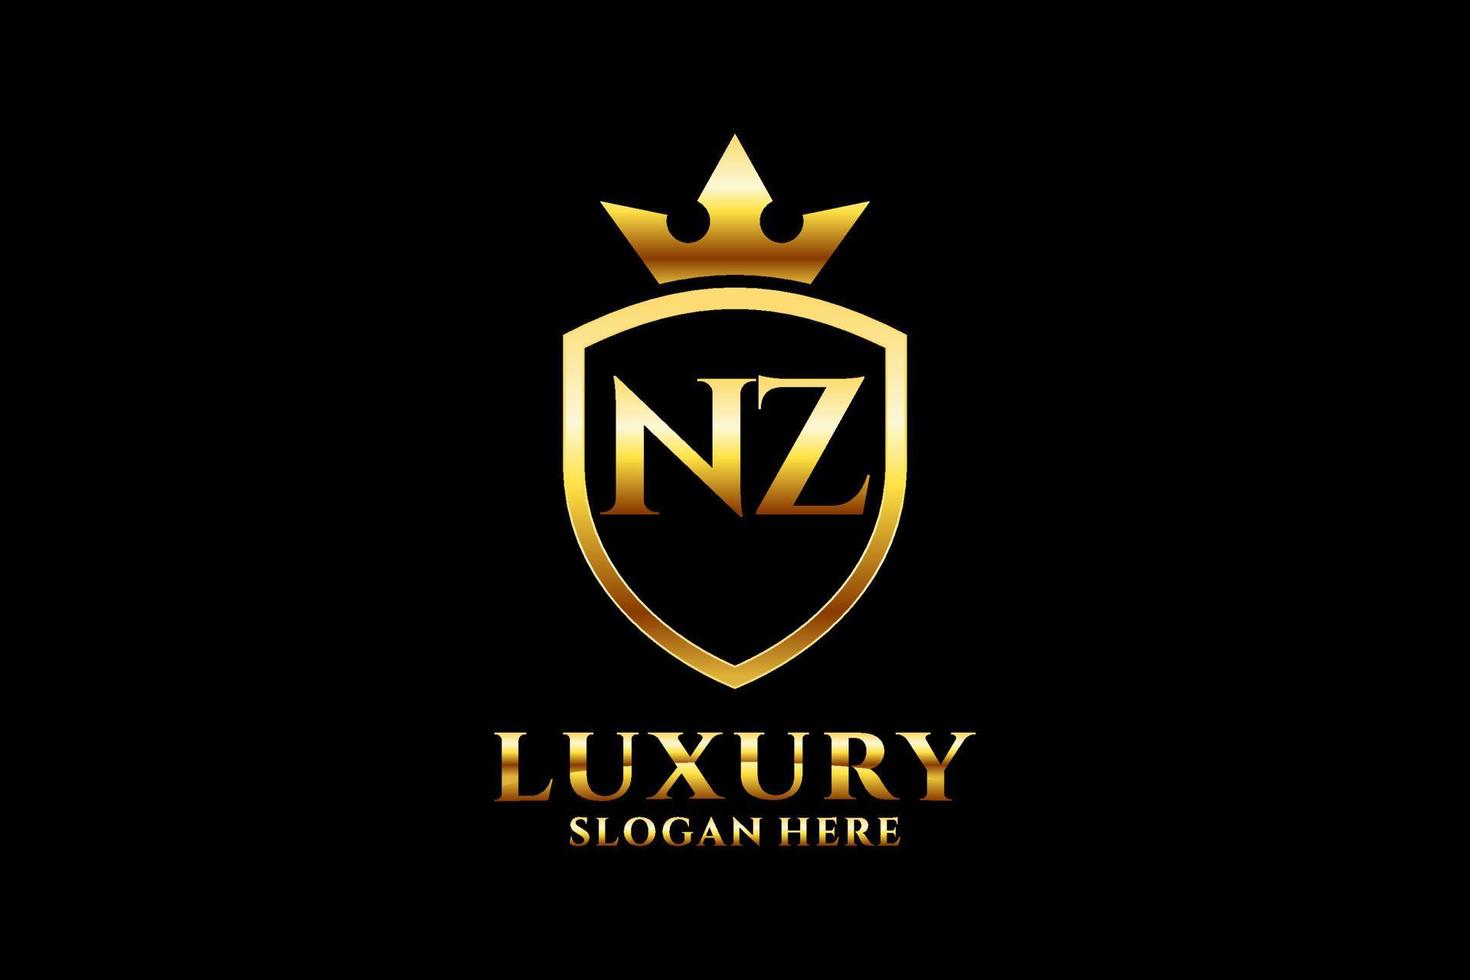 initial NZ elegant luxury monogram logo or badge template with scrolls and royal crown - perfect for luxurious branding projects vector